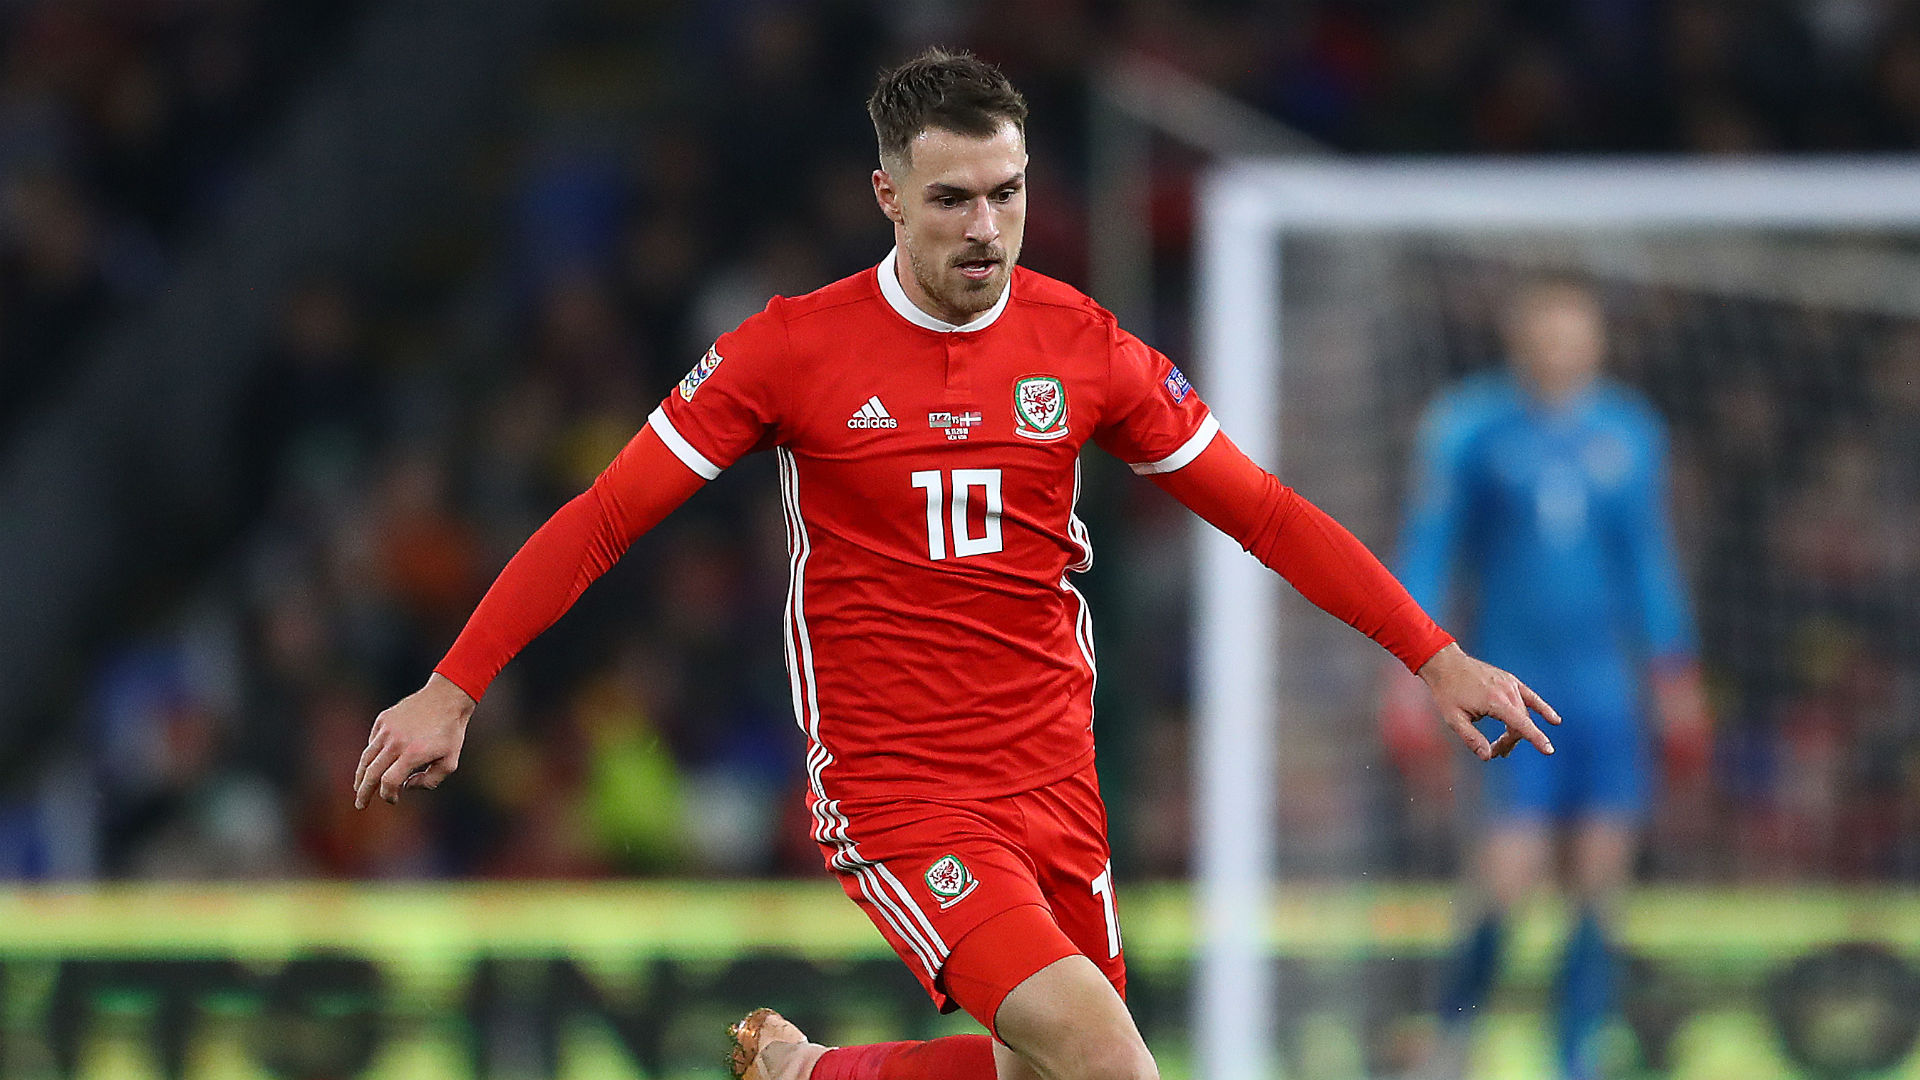 He missed Wales' friendly against Trinidad and Tobago on Wednesday and now Aaron Ramsey has returned to Arsenal for treatment.